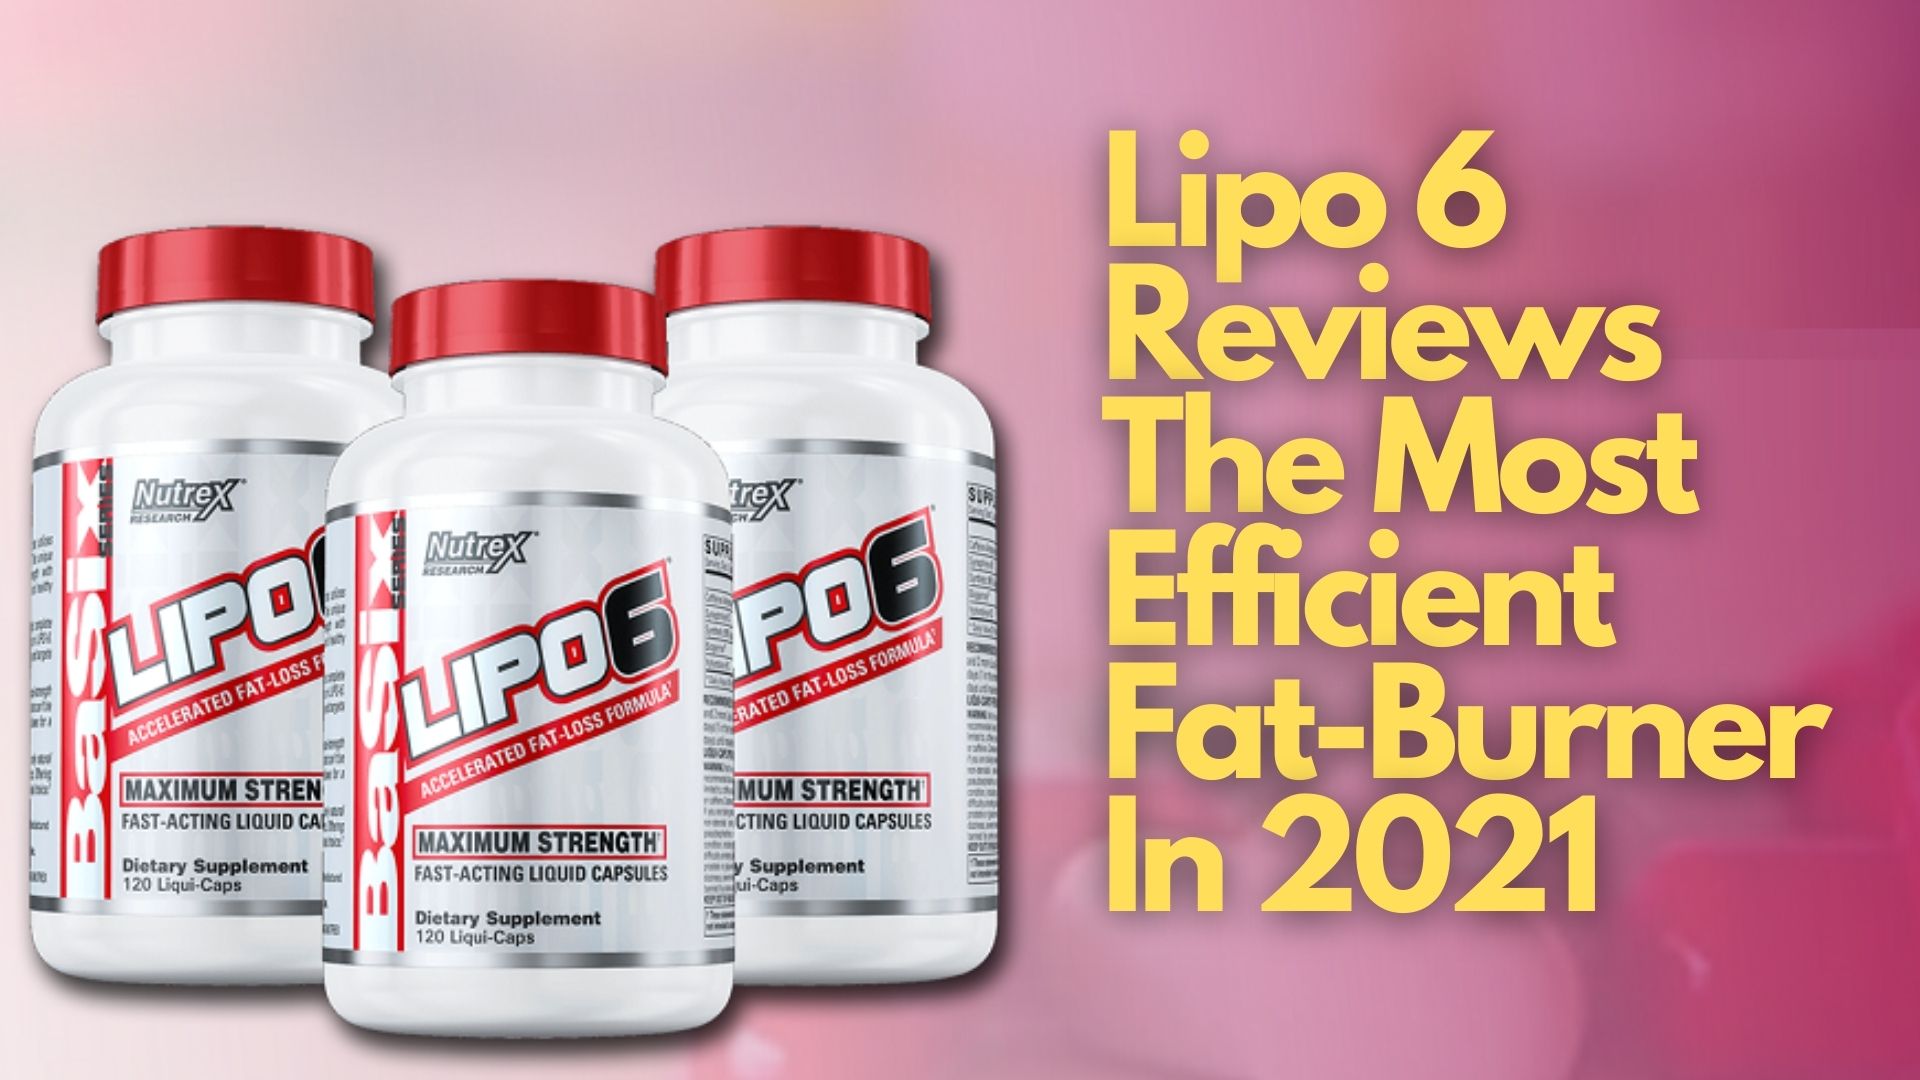 Lipo 6 Reviews – The Most Efficient Fat-Burner In 2021